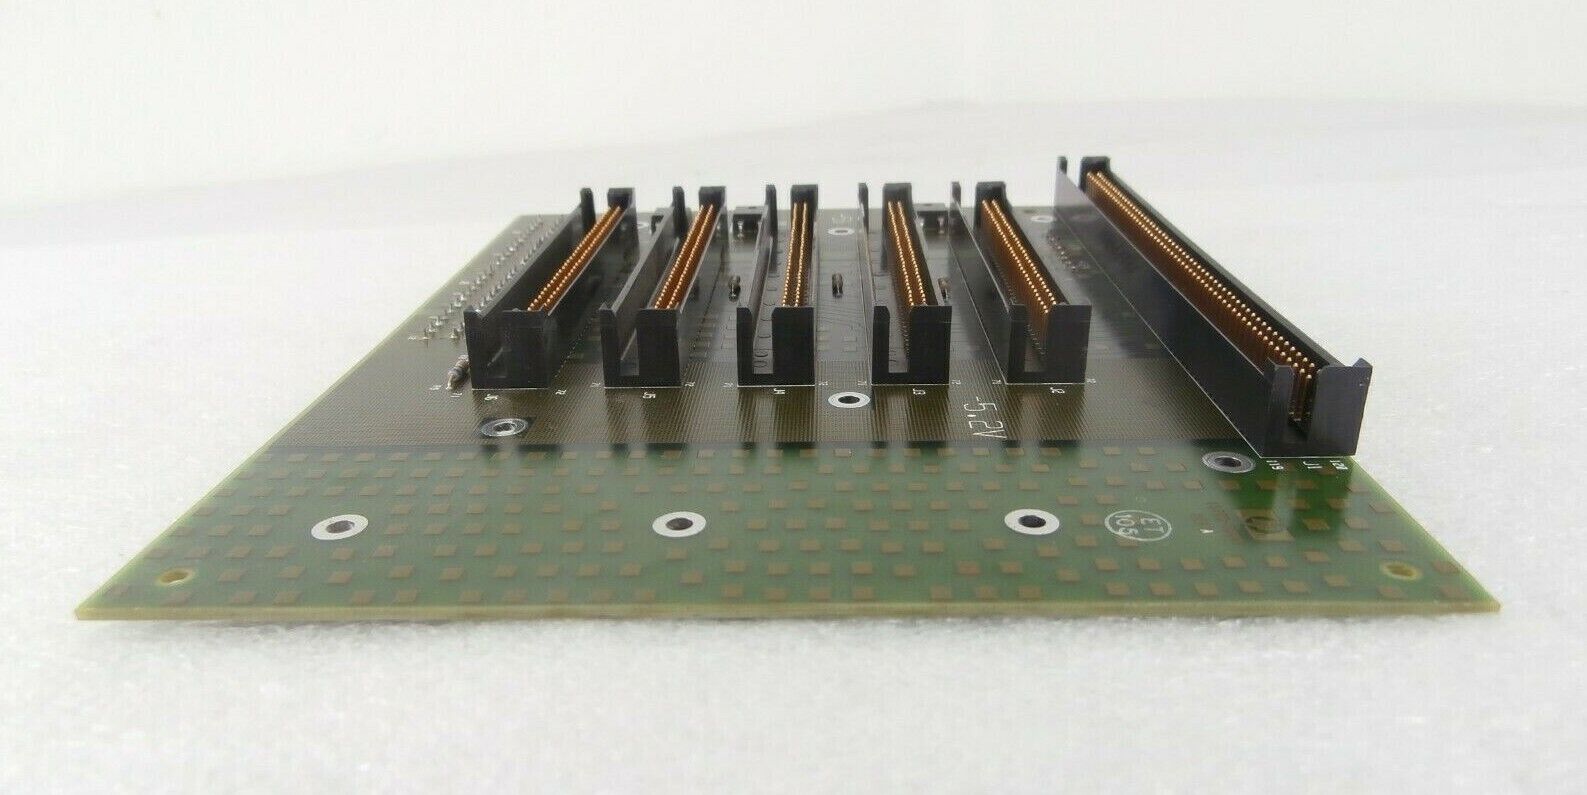 Agilent Technologies 16700-66501 Modular System Backplane PCB HP Working Spare